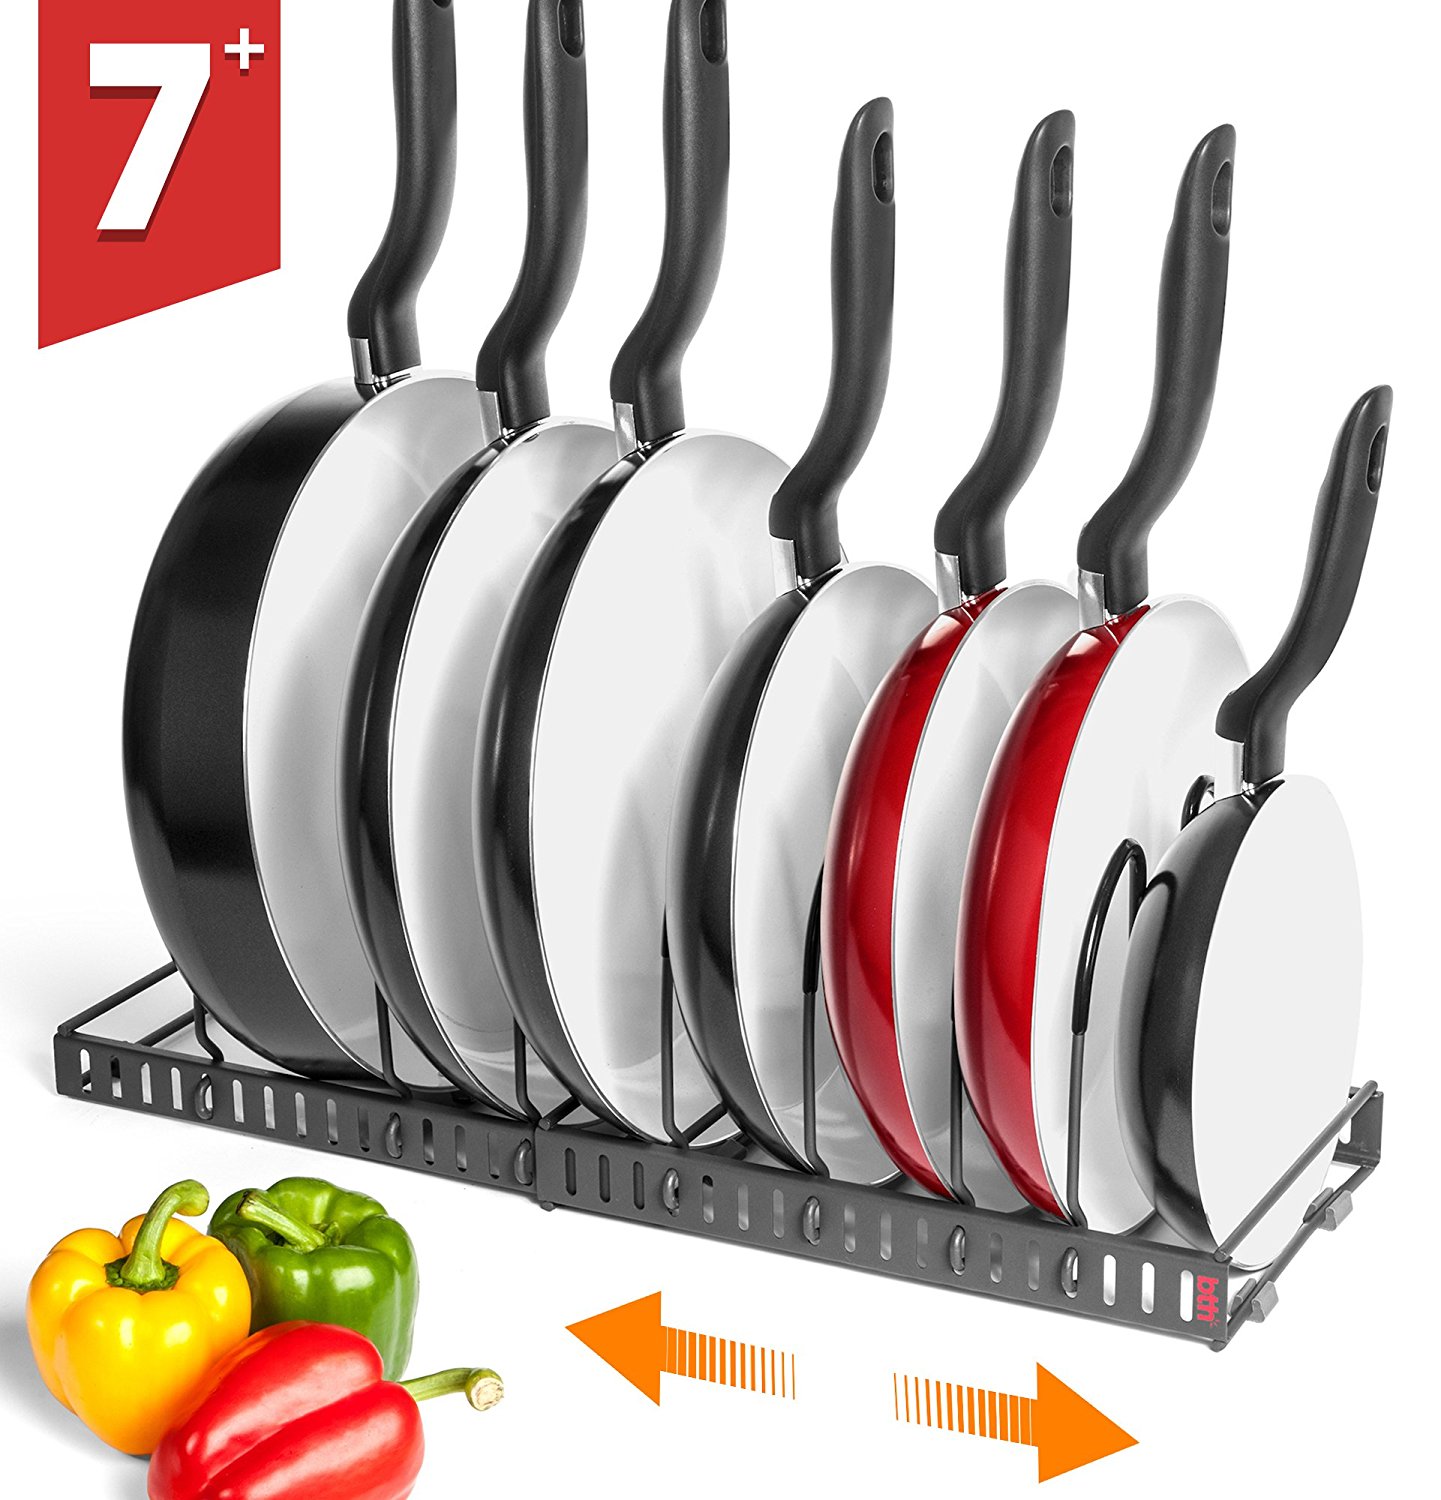 BTH NEW Expandable Kitchen Pan and Pot Organizer Rack: Stores 7+ Pans, Can Be Extended to 22.25", Total 7 Adjustable Compartments, Pantry Cupboard Bakeware Plate Holder (BTH Expandable Pan Organizer)